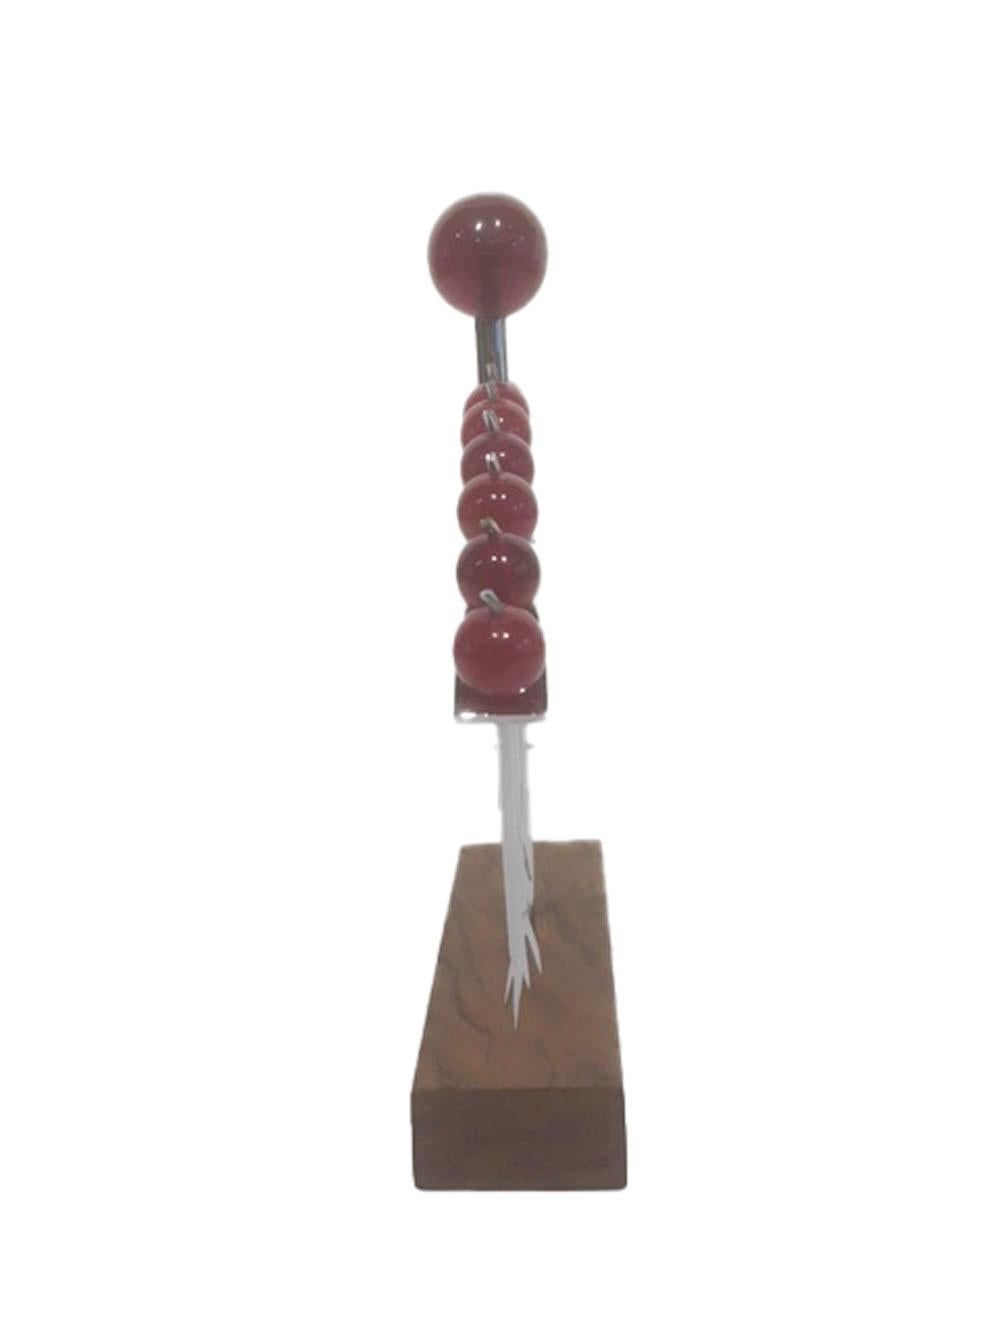 Plated 12 Art Deco Cocktail Picks in Chrome with Cherry Tops Hanging in Matching Stand For Sale